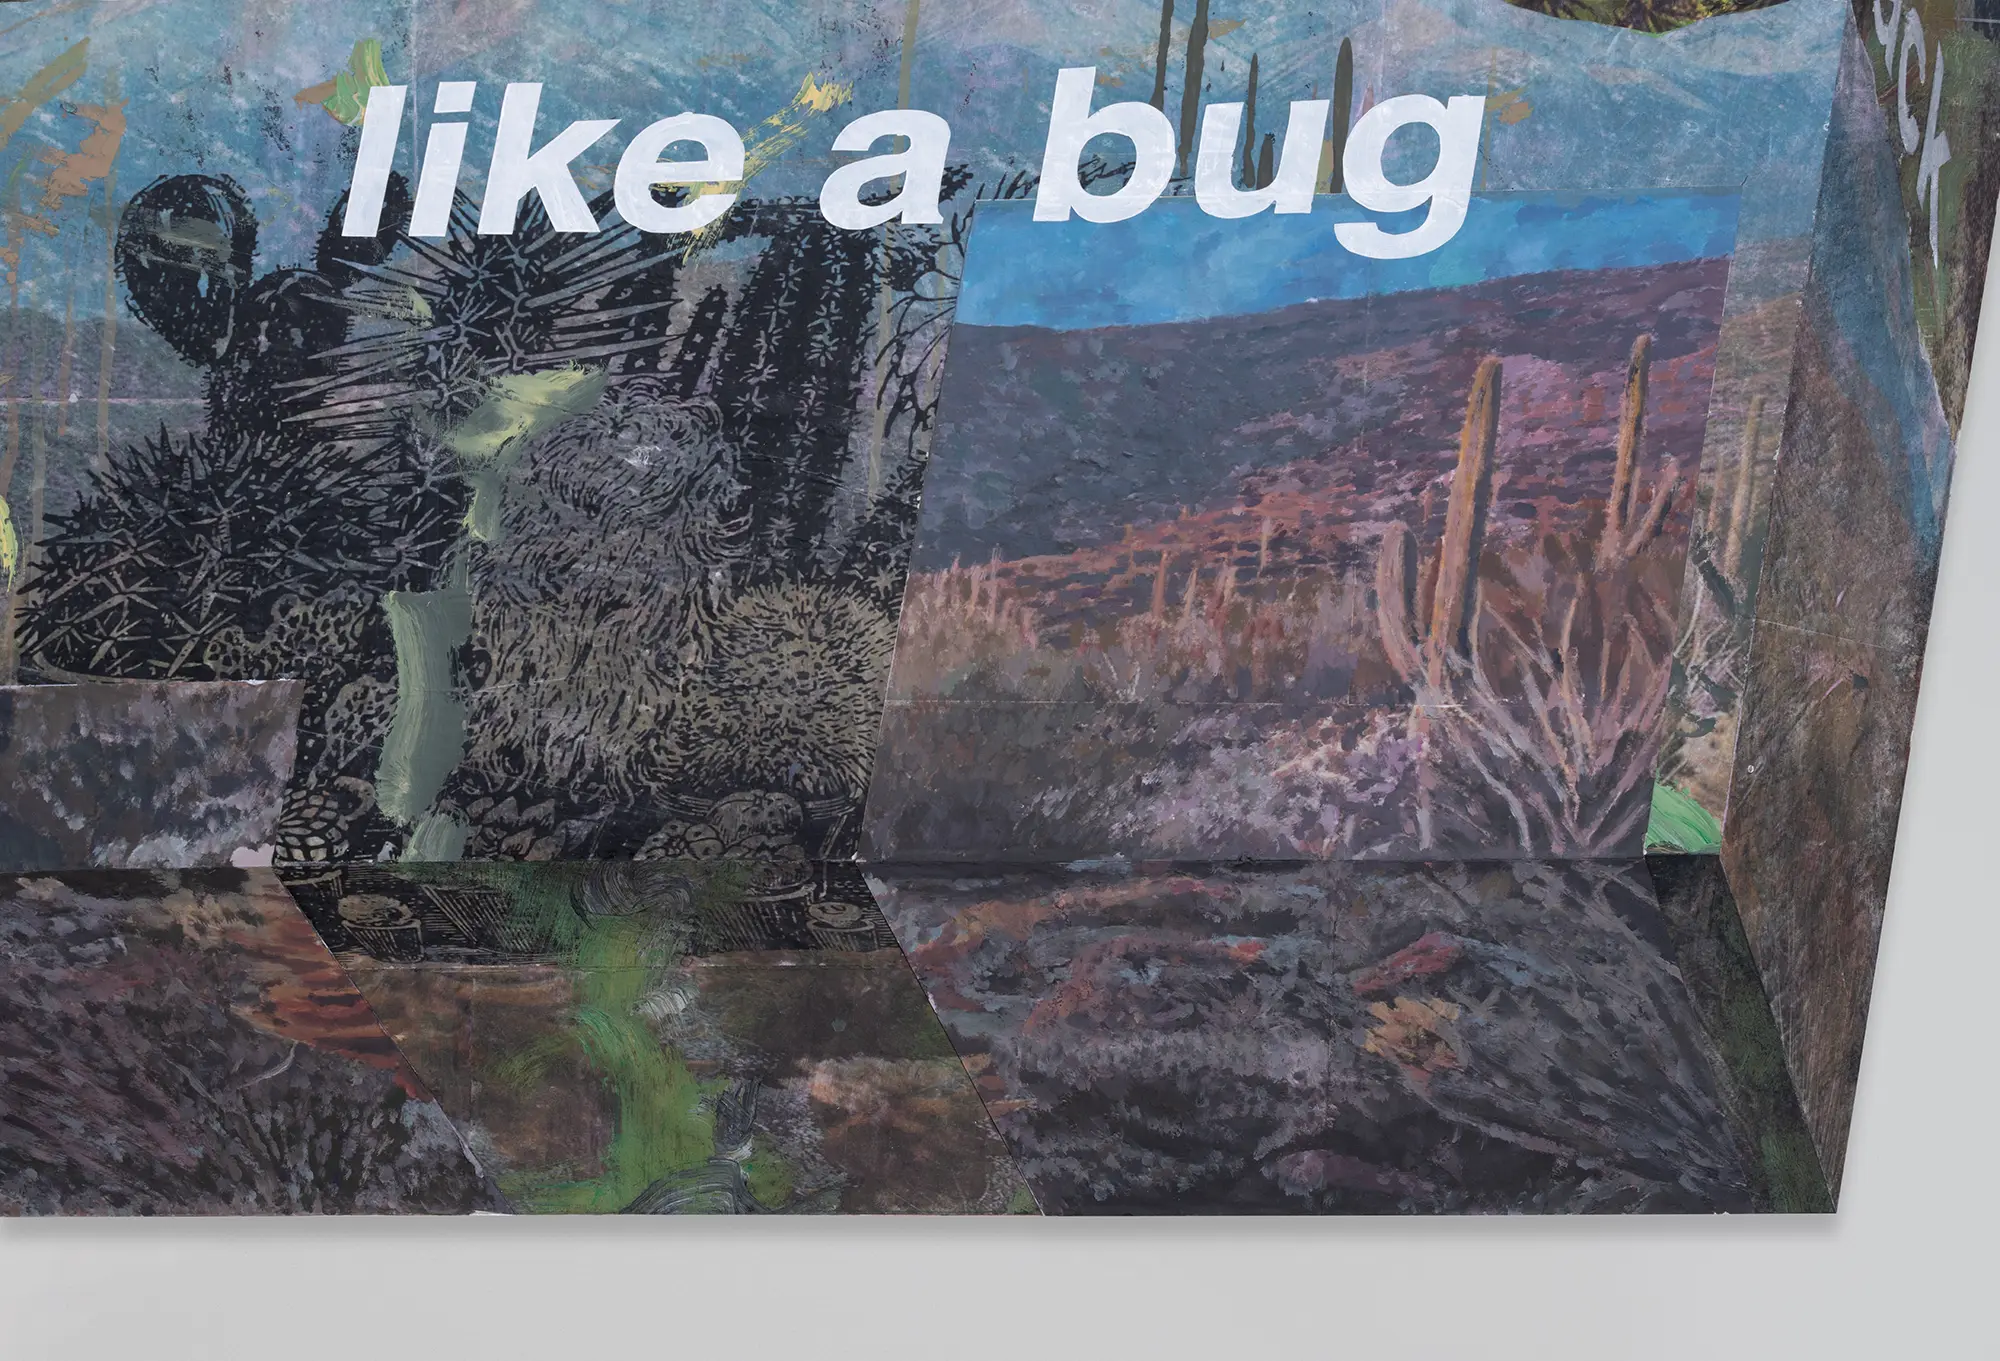 michael rikio ming hee ho detail of mixed media artwork with text 'like a bug' over a nature-inspired landscape